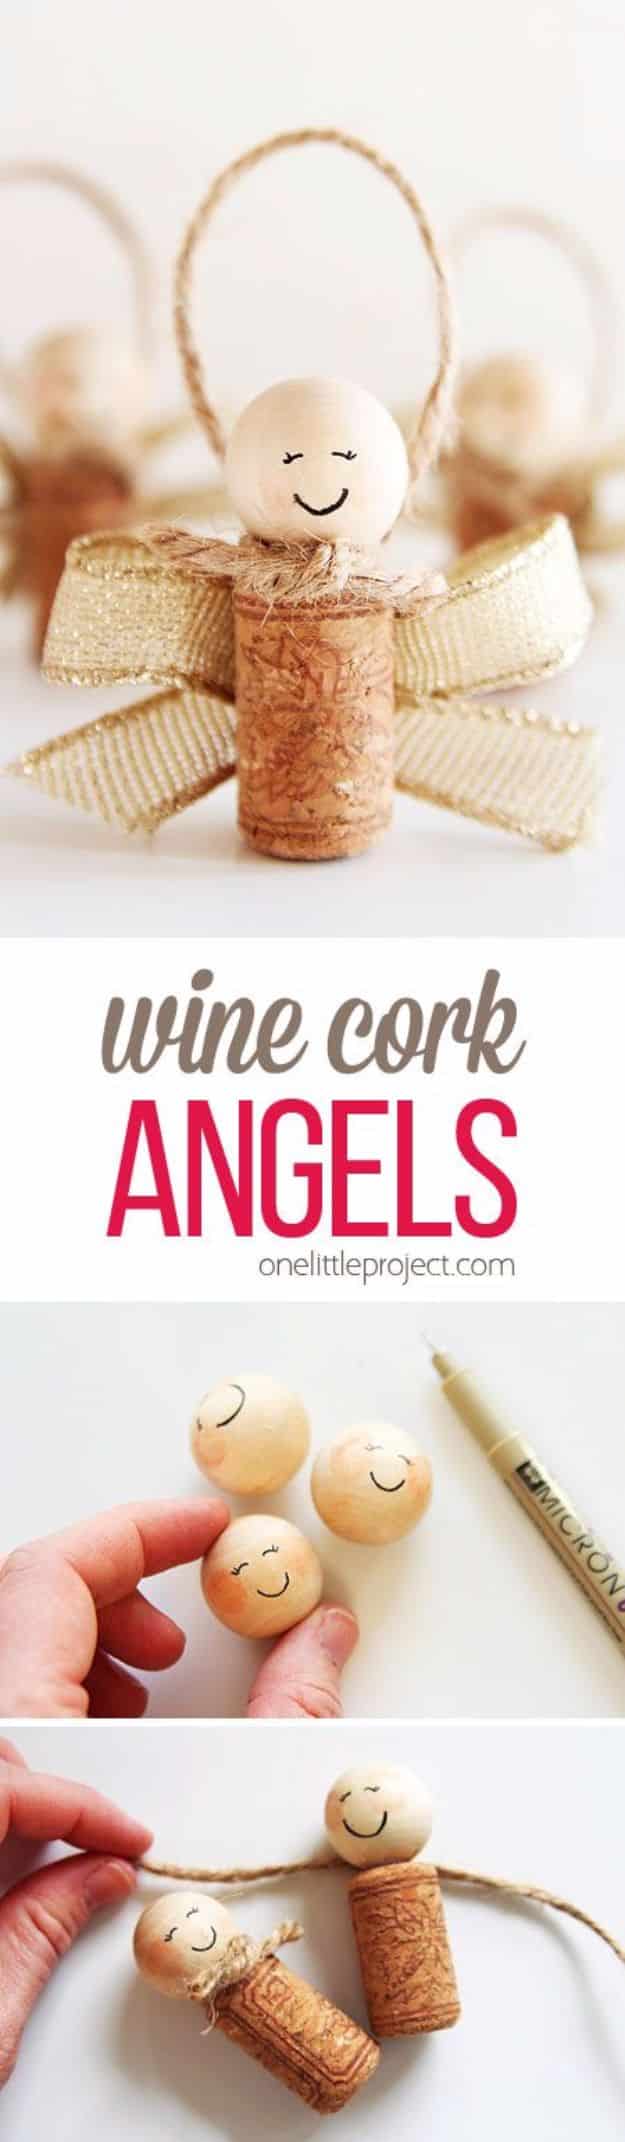 Wine Cork Crafts and Craft Ideas With Wine Corks - Wine Cork Angels - Cool Projects to Make With Old Wine Cork - Outdoor and Garden, Easy Wall Art, Fun DIY Gifts and Cheap Crafts for Adults, Kids and Teens 